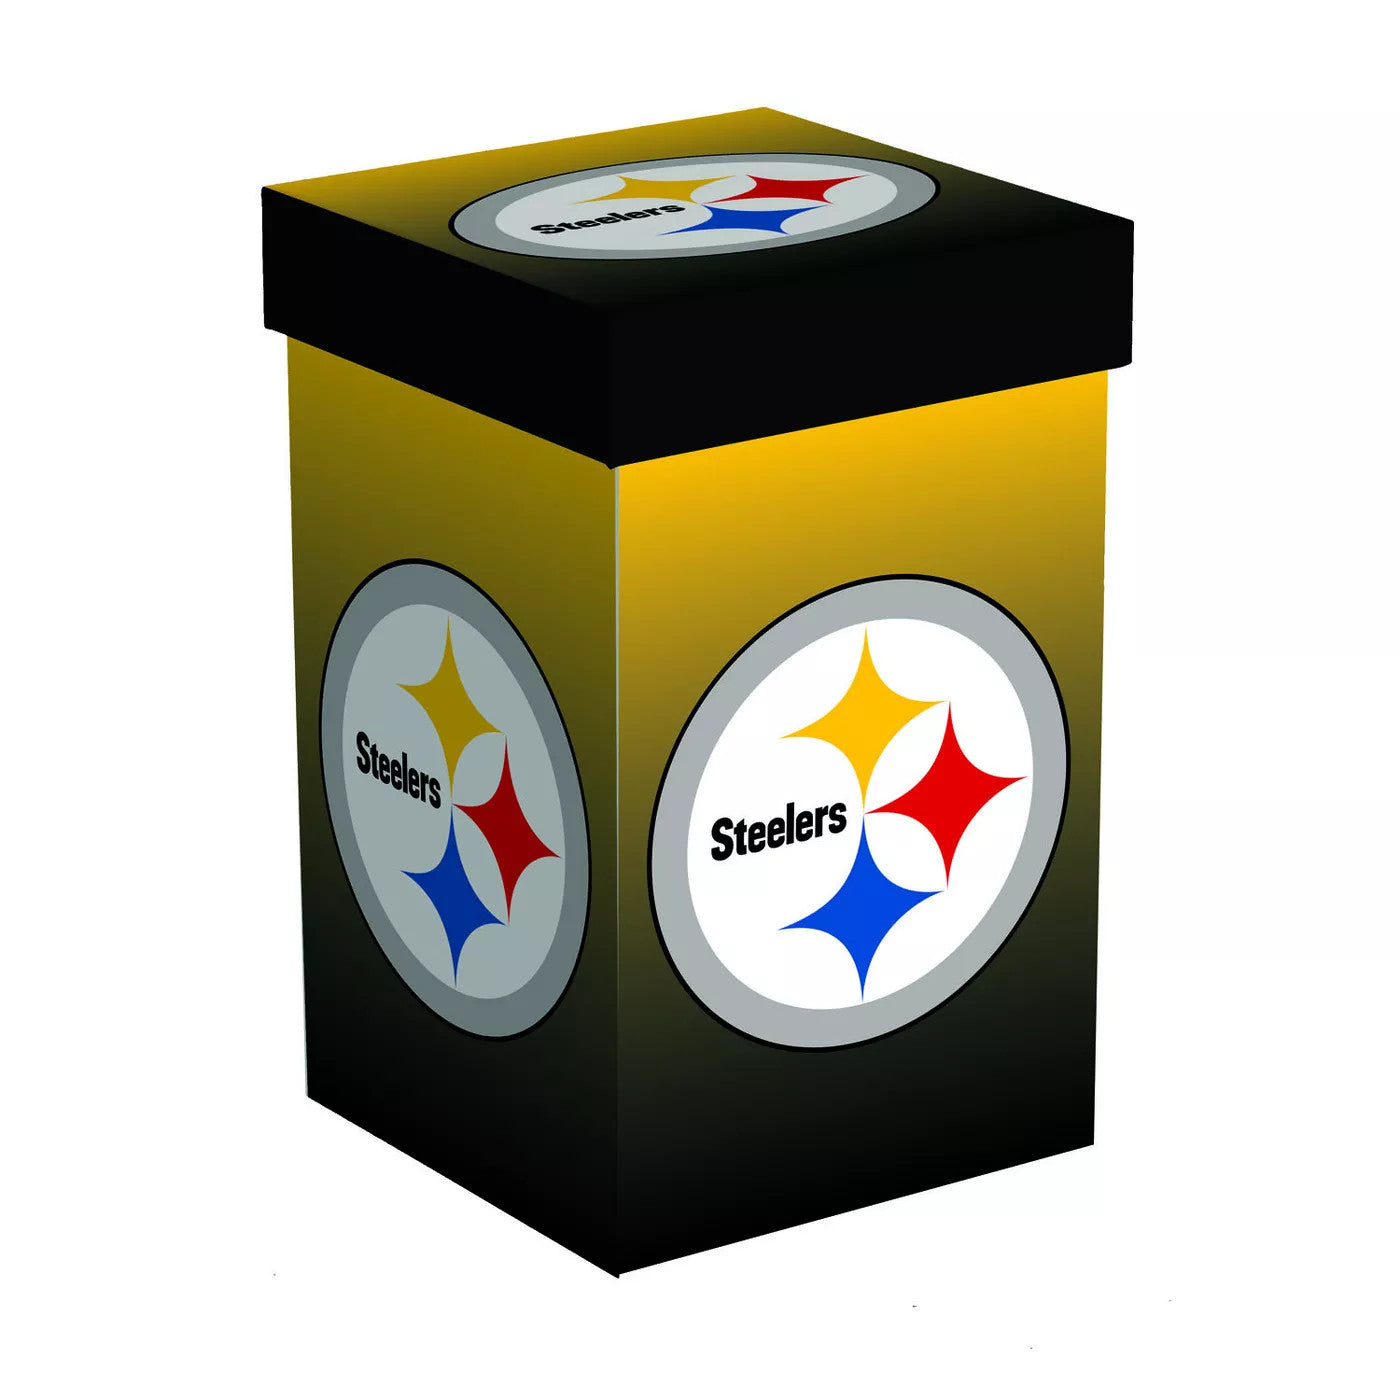 PITTSBURGH STEELERS BOXED TRAVEL LATTE